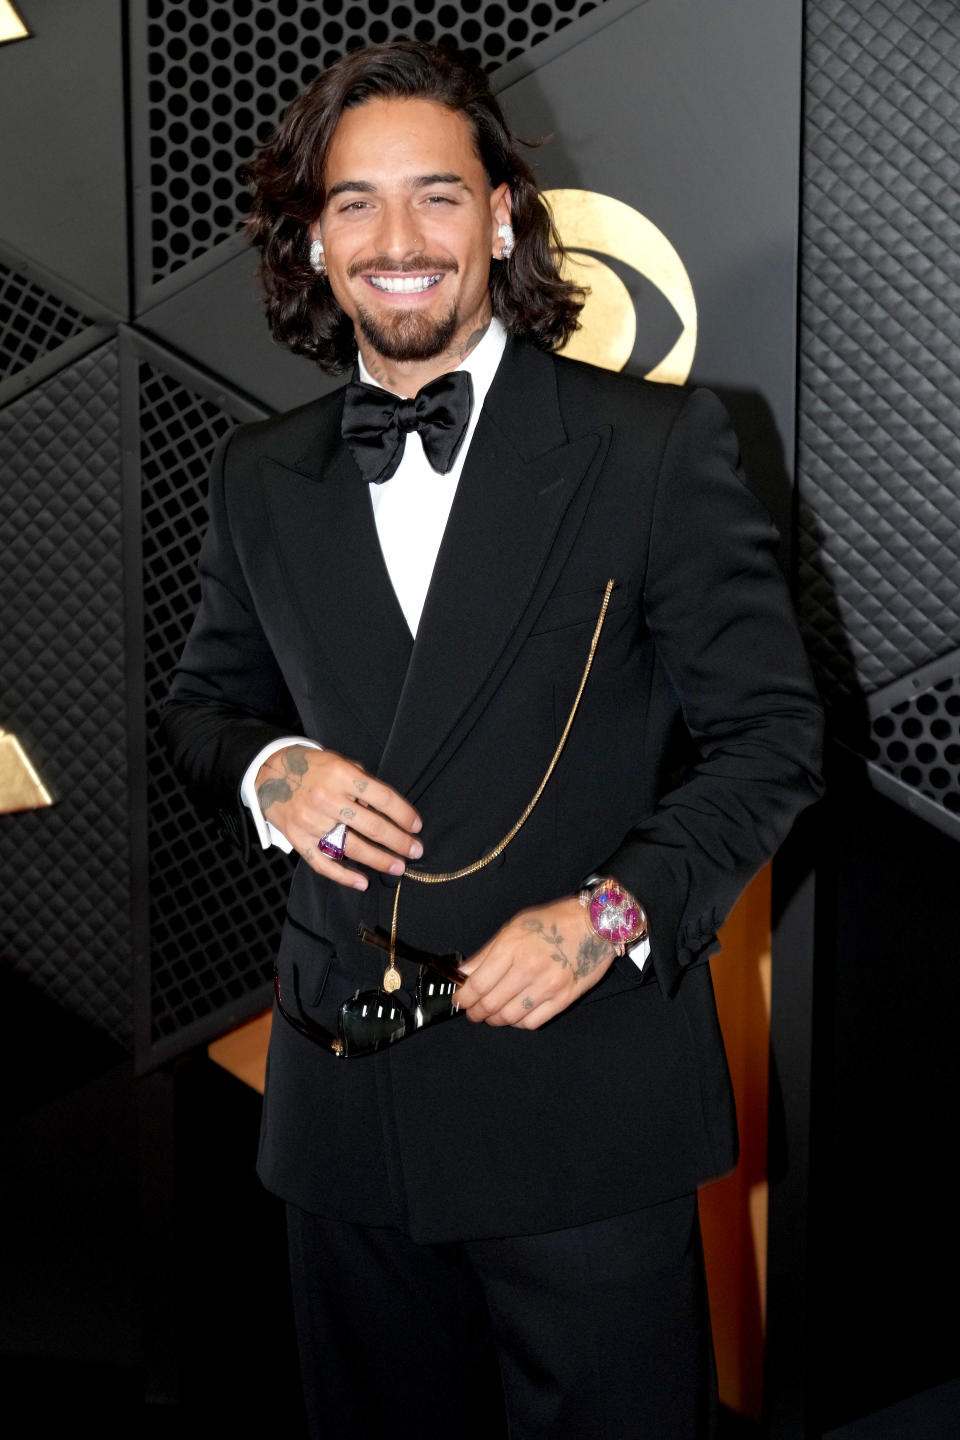 Maluma smiling at a celebrity event, wearing a black tuxedo with a bow tie and gold chain accessory